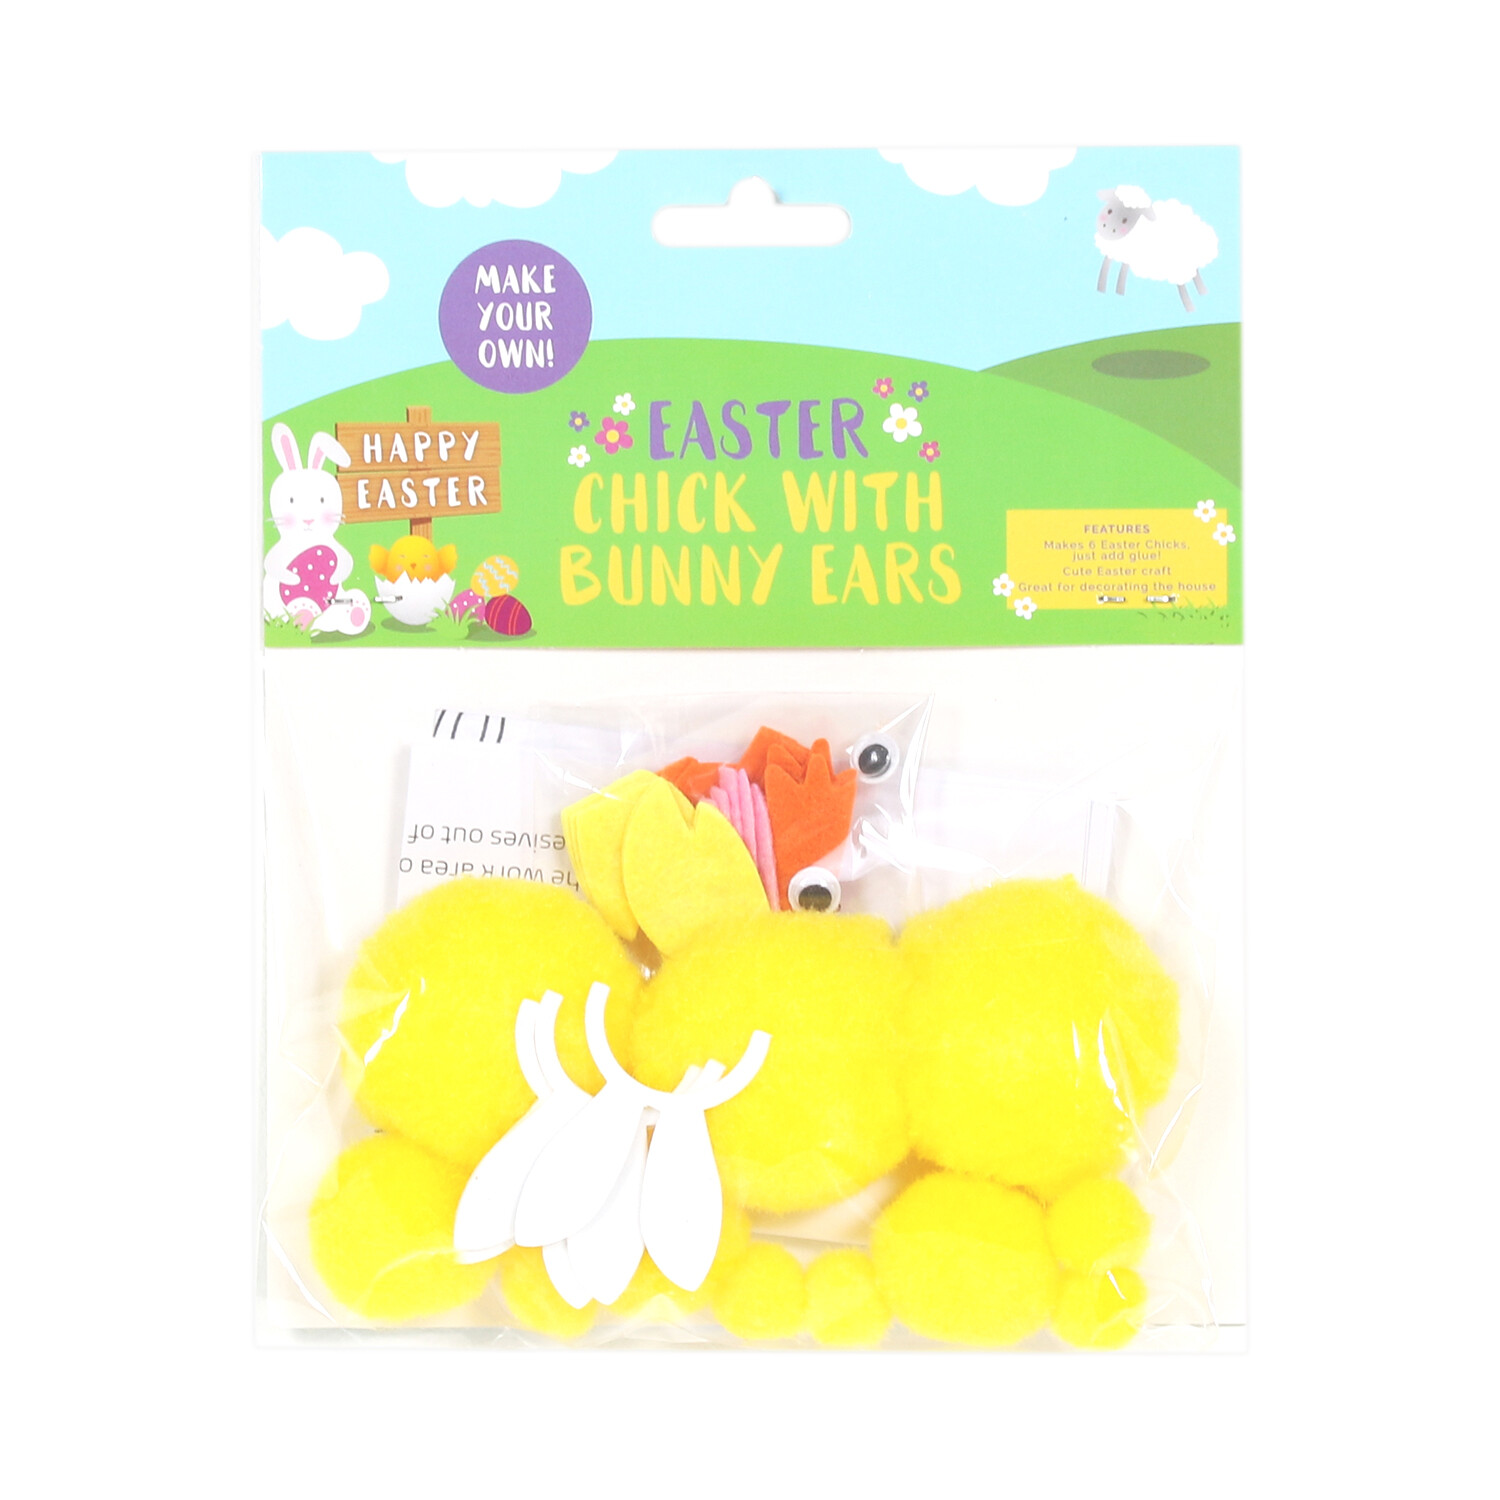 Make Your Own Chick with Bunny Ears Kit Image